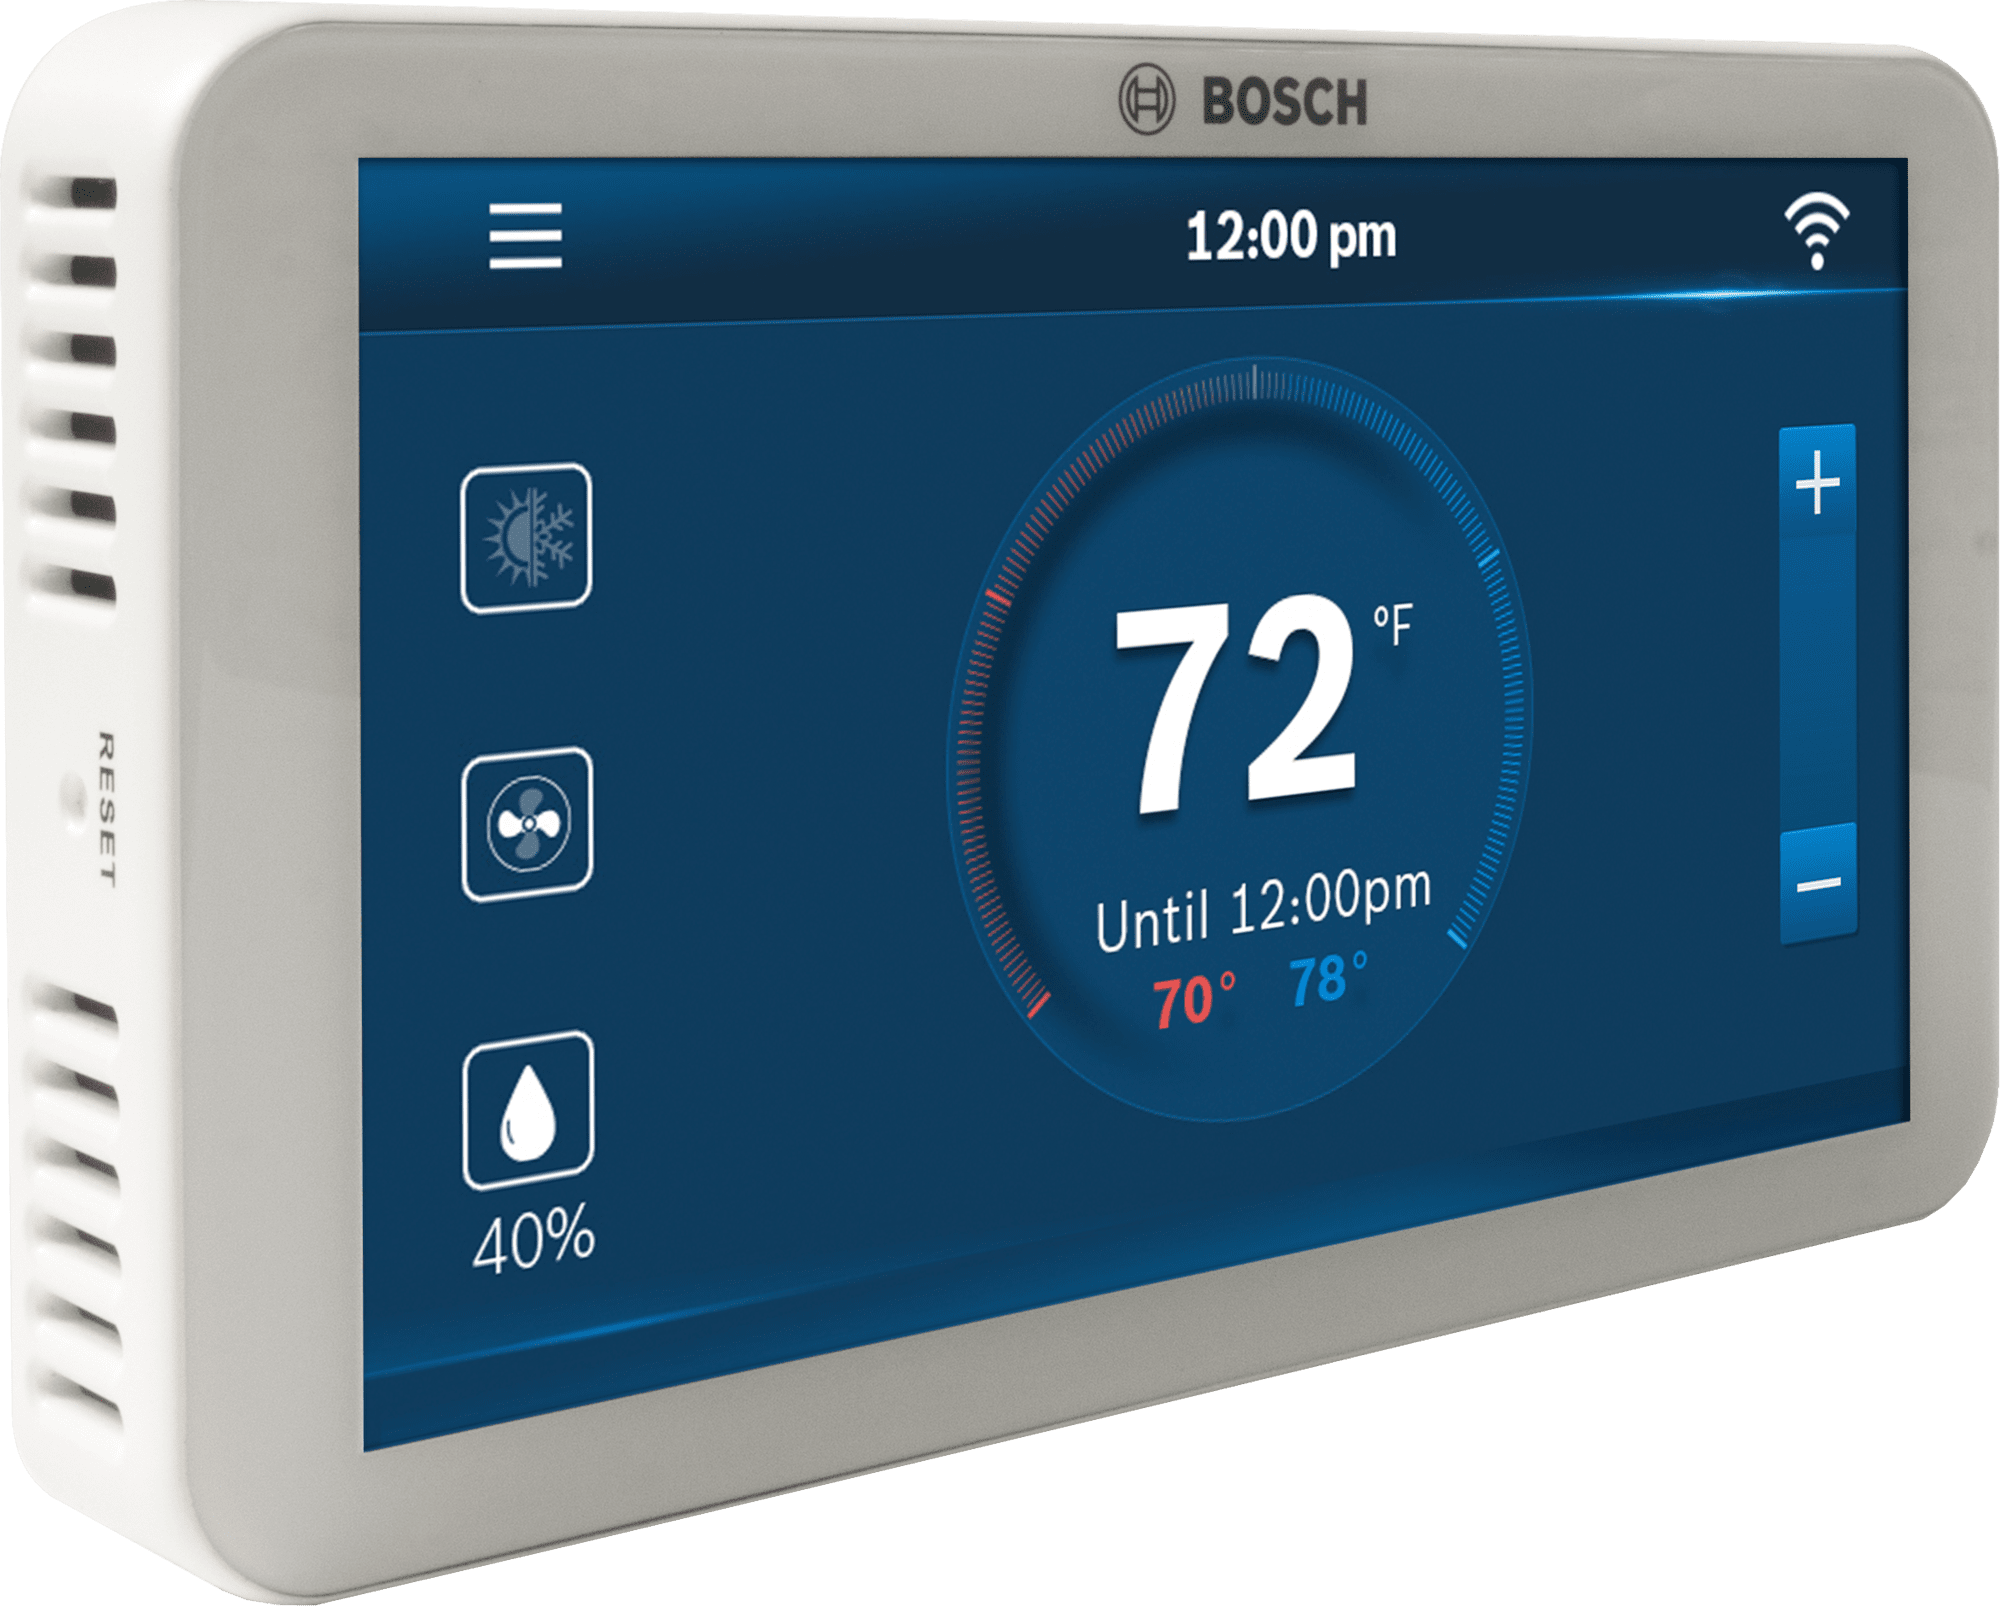 Bosch Smart Thermostat Feels the Heat From Firmware Bug